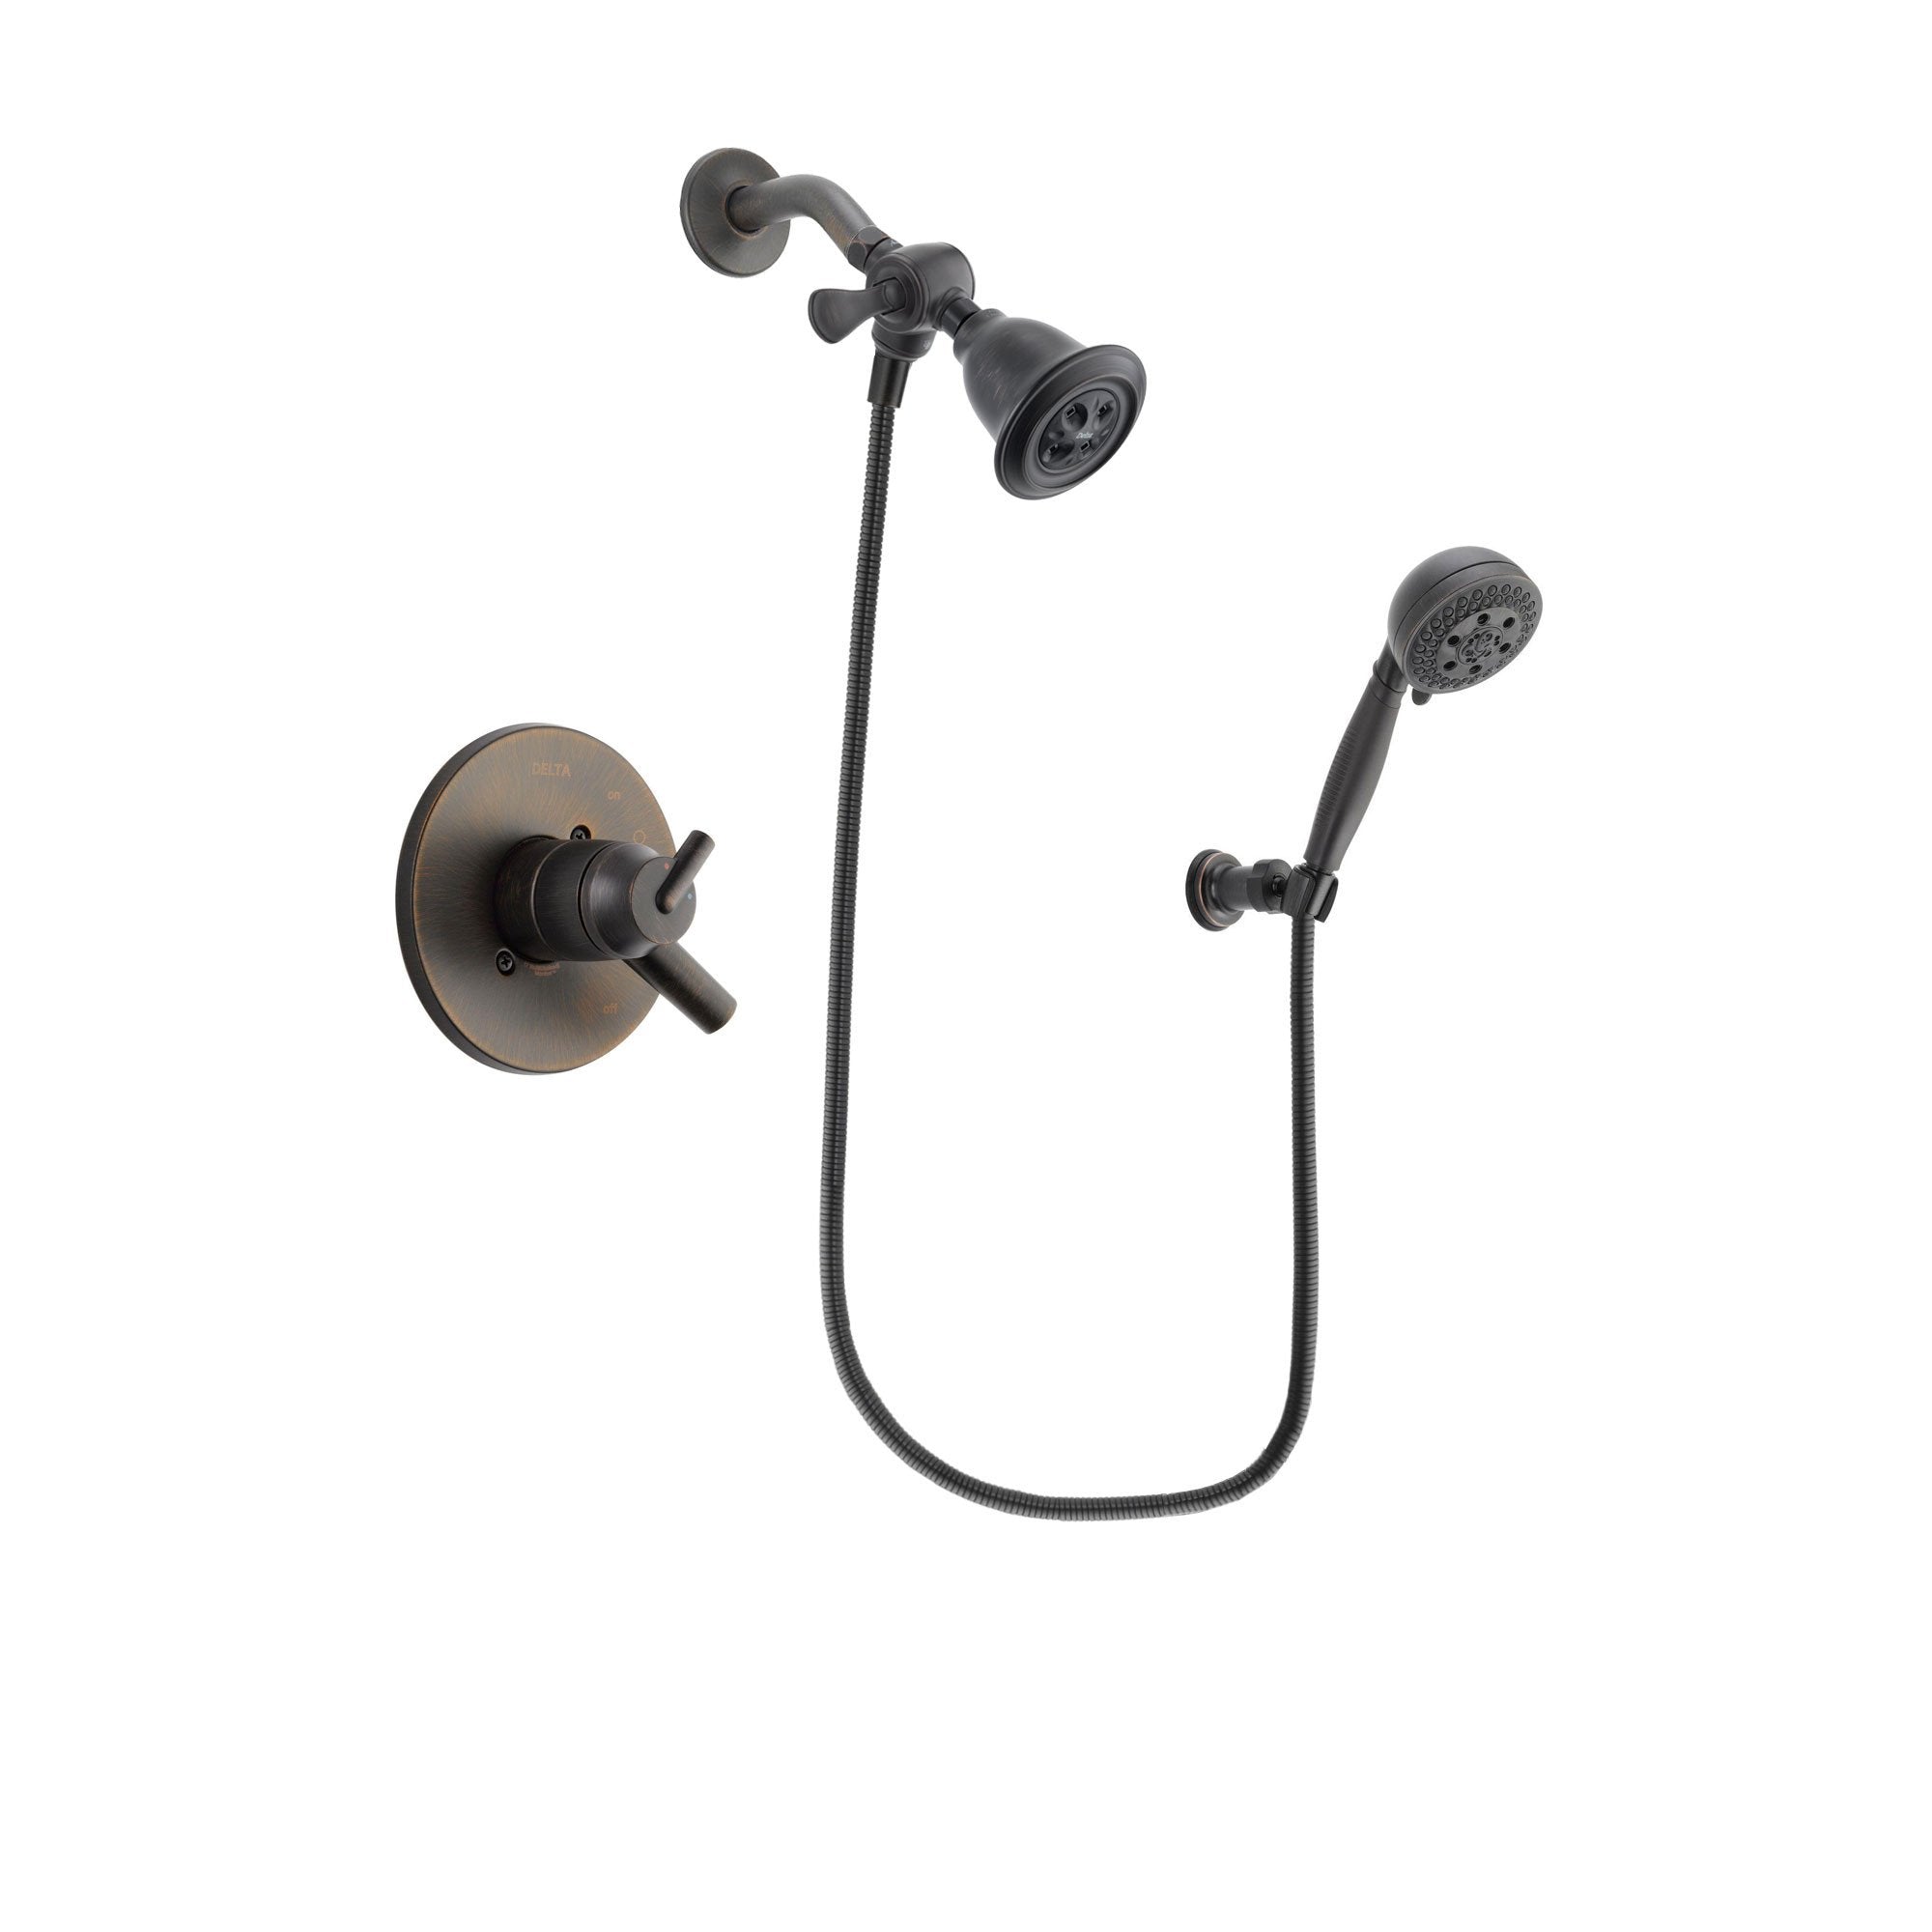 Delta Trinsic Venetian Bronze Finish Dual Control Shower Faucet System Package with Water Efficient Showerhead and 5-Setting Wall Mount Personal Handheld Shower Spray Includes Rough-in Valve DSP2792V